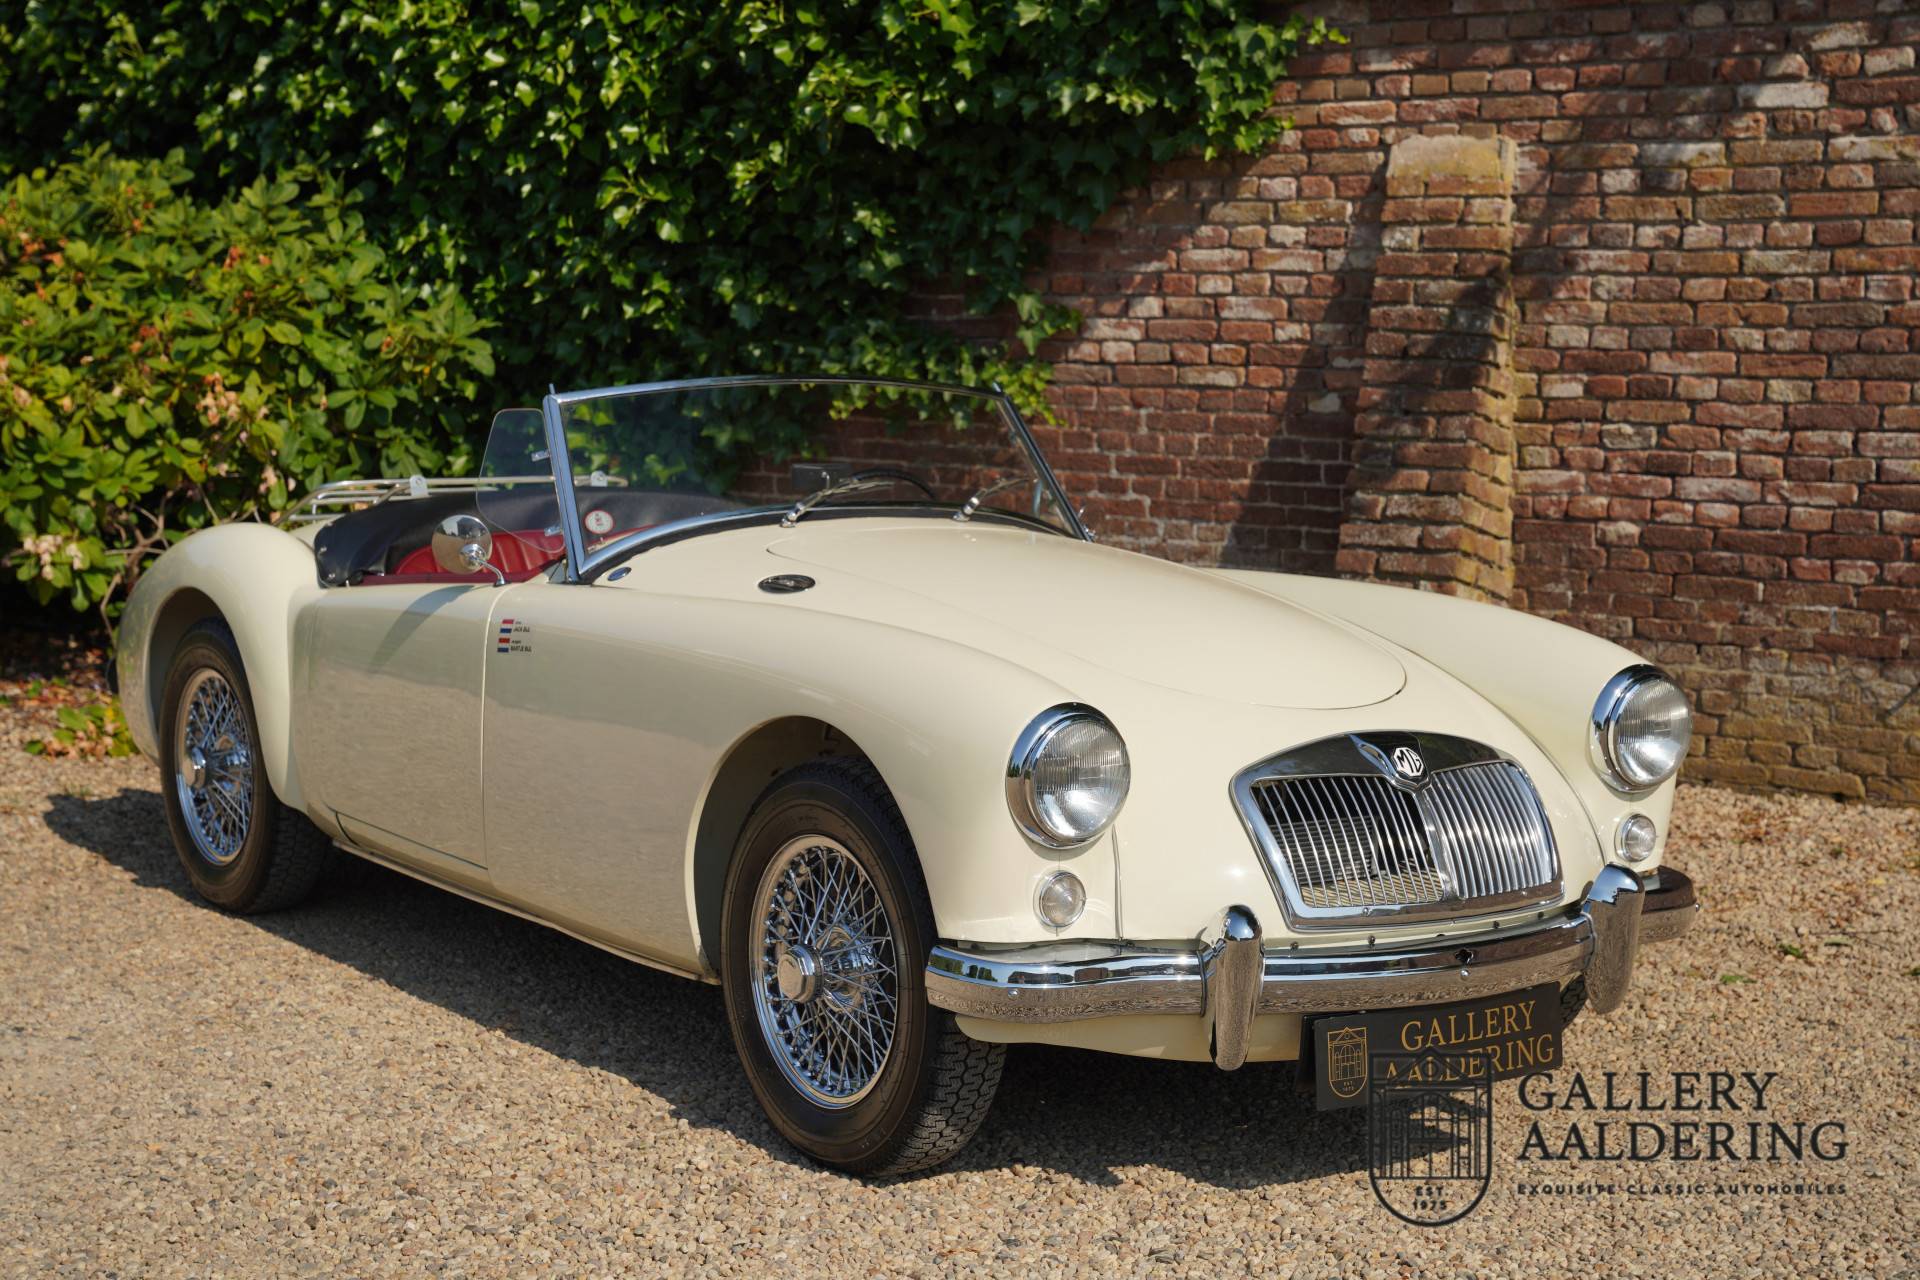 For Sale: MG MGA 1500 (1958) offered for £33,526